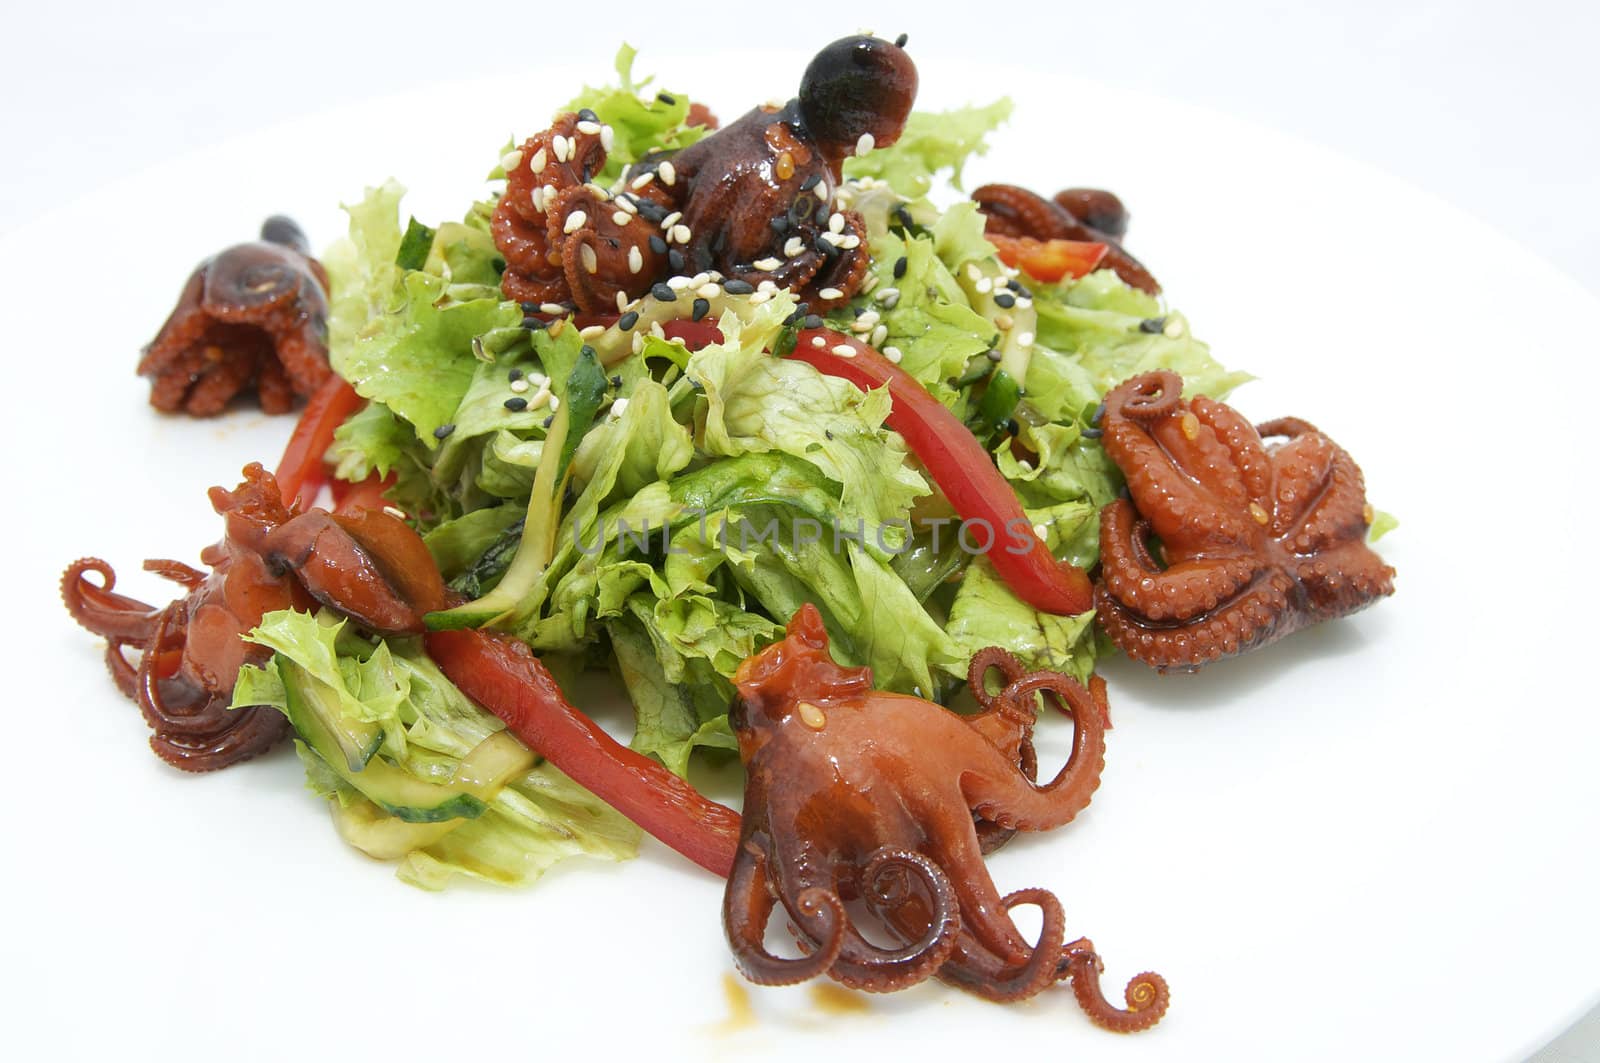 salad of octopus by Lester120